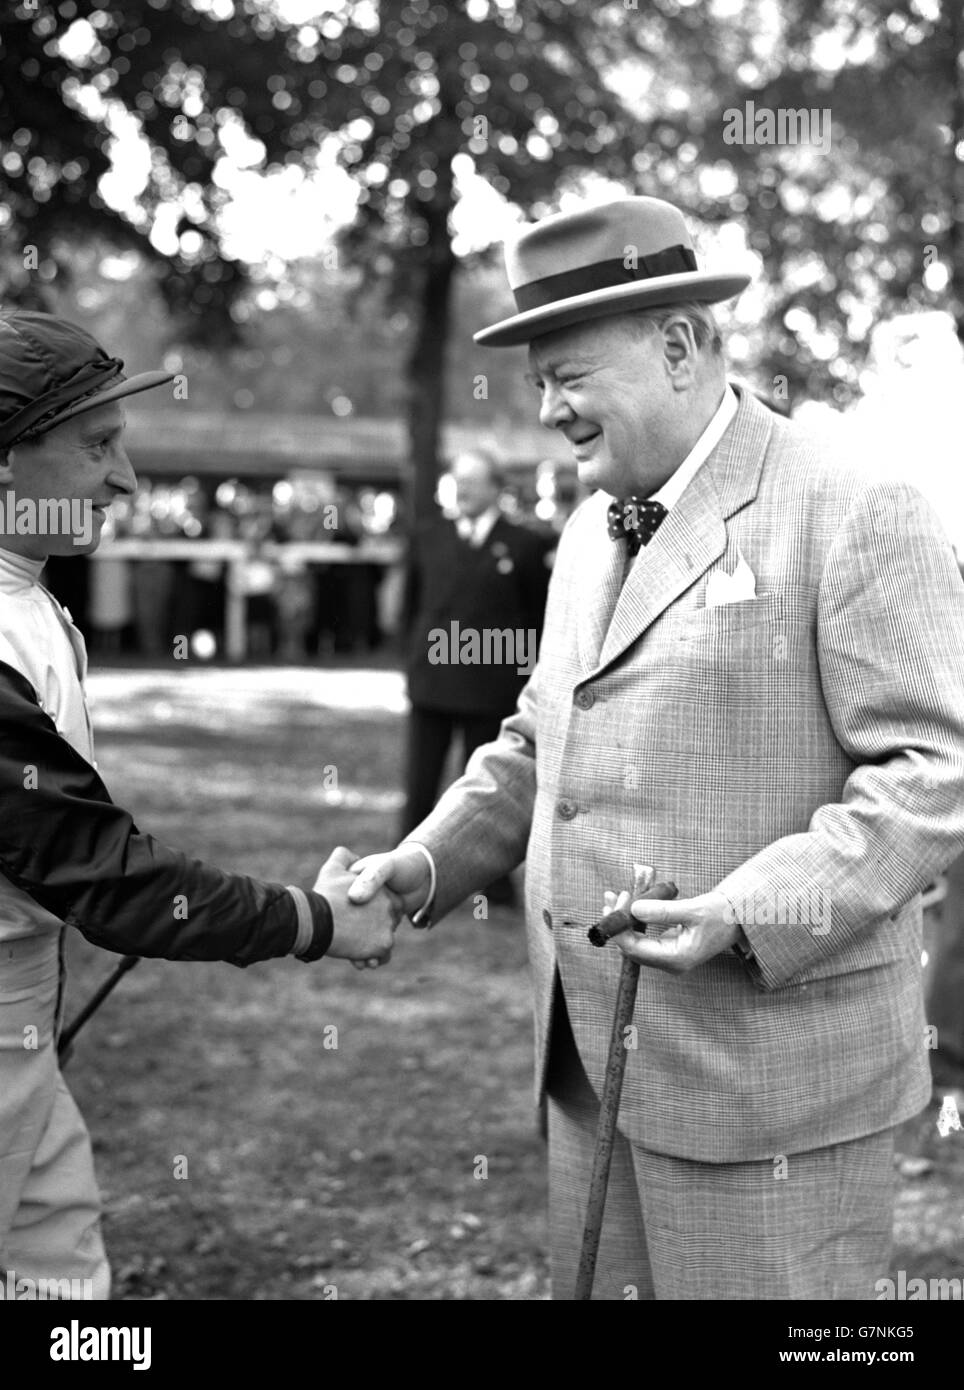 Horse Racing - Winston Churchill - Windsor, Berkshire. Winston Churchill shakes hands with jockey Tommy Hawcroft, who rode his horse Colonist II to victory at Windsor. Stock Photo